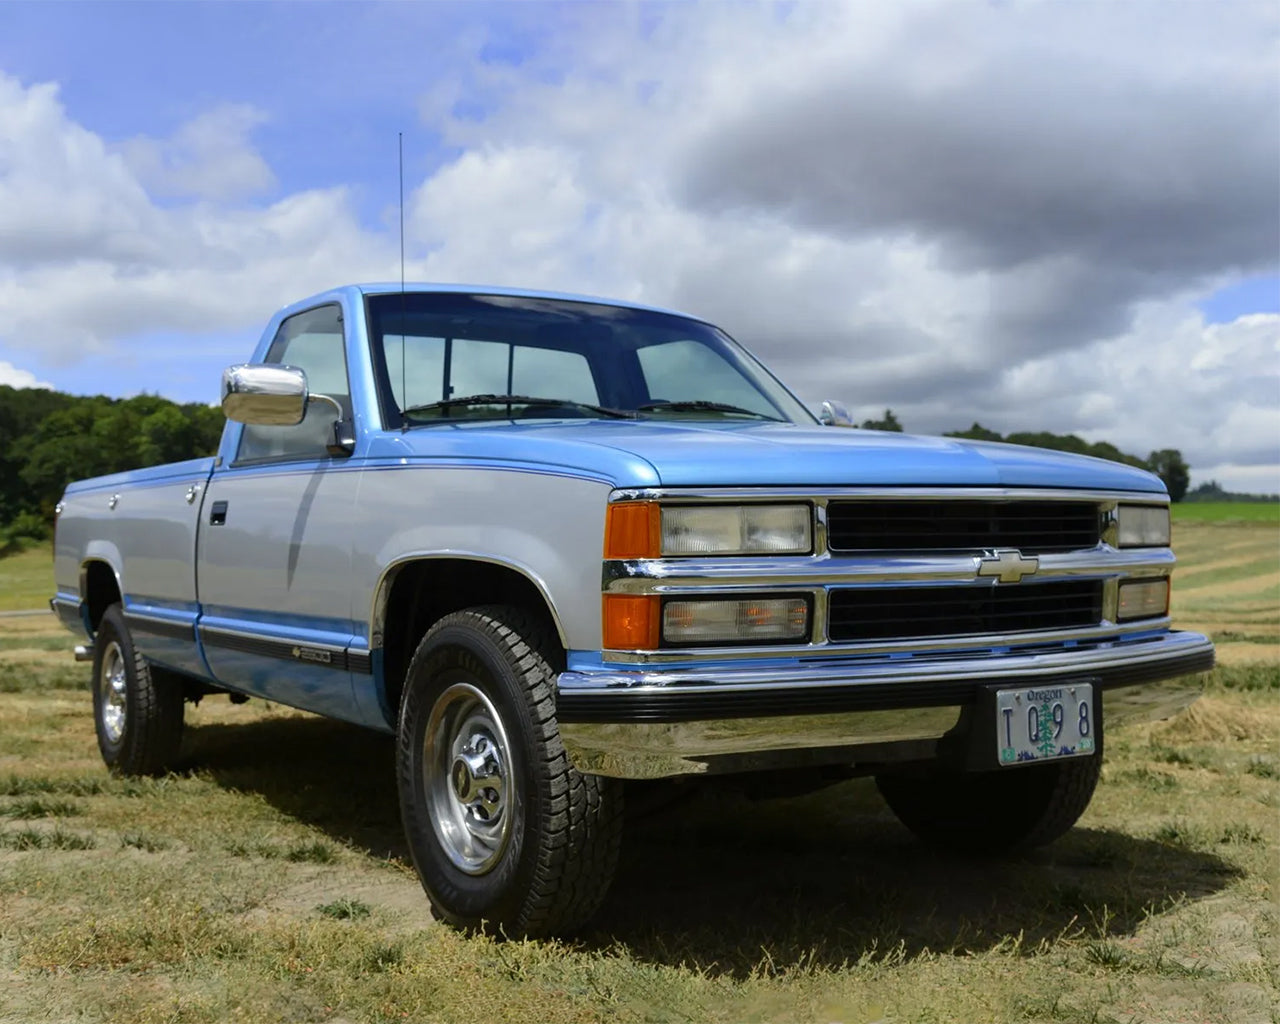 Silver and Blue Chevrolet C2500 truck parked on the grass with cloudy blue sky